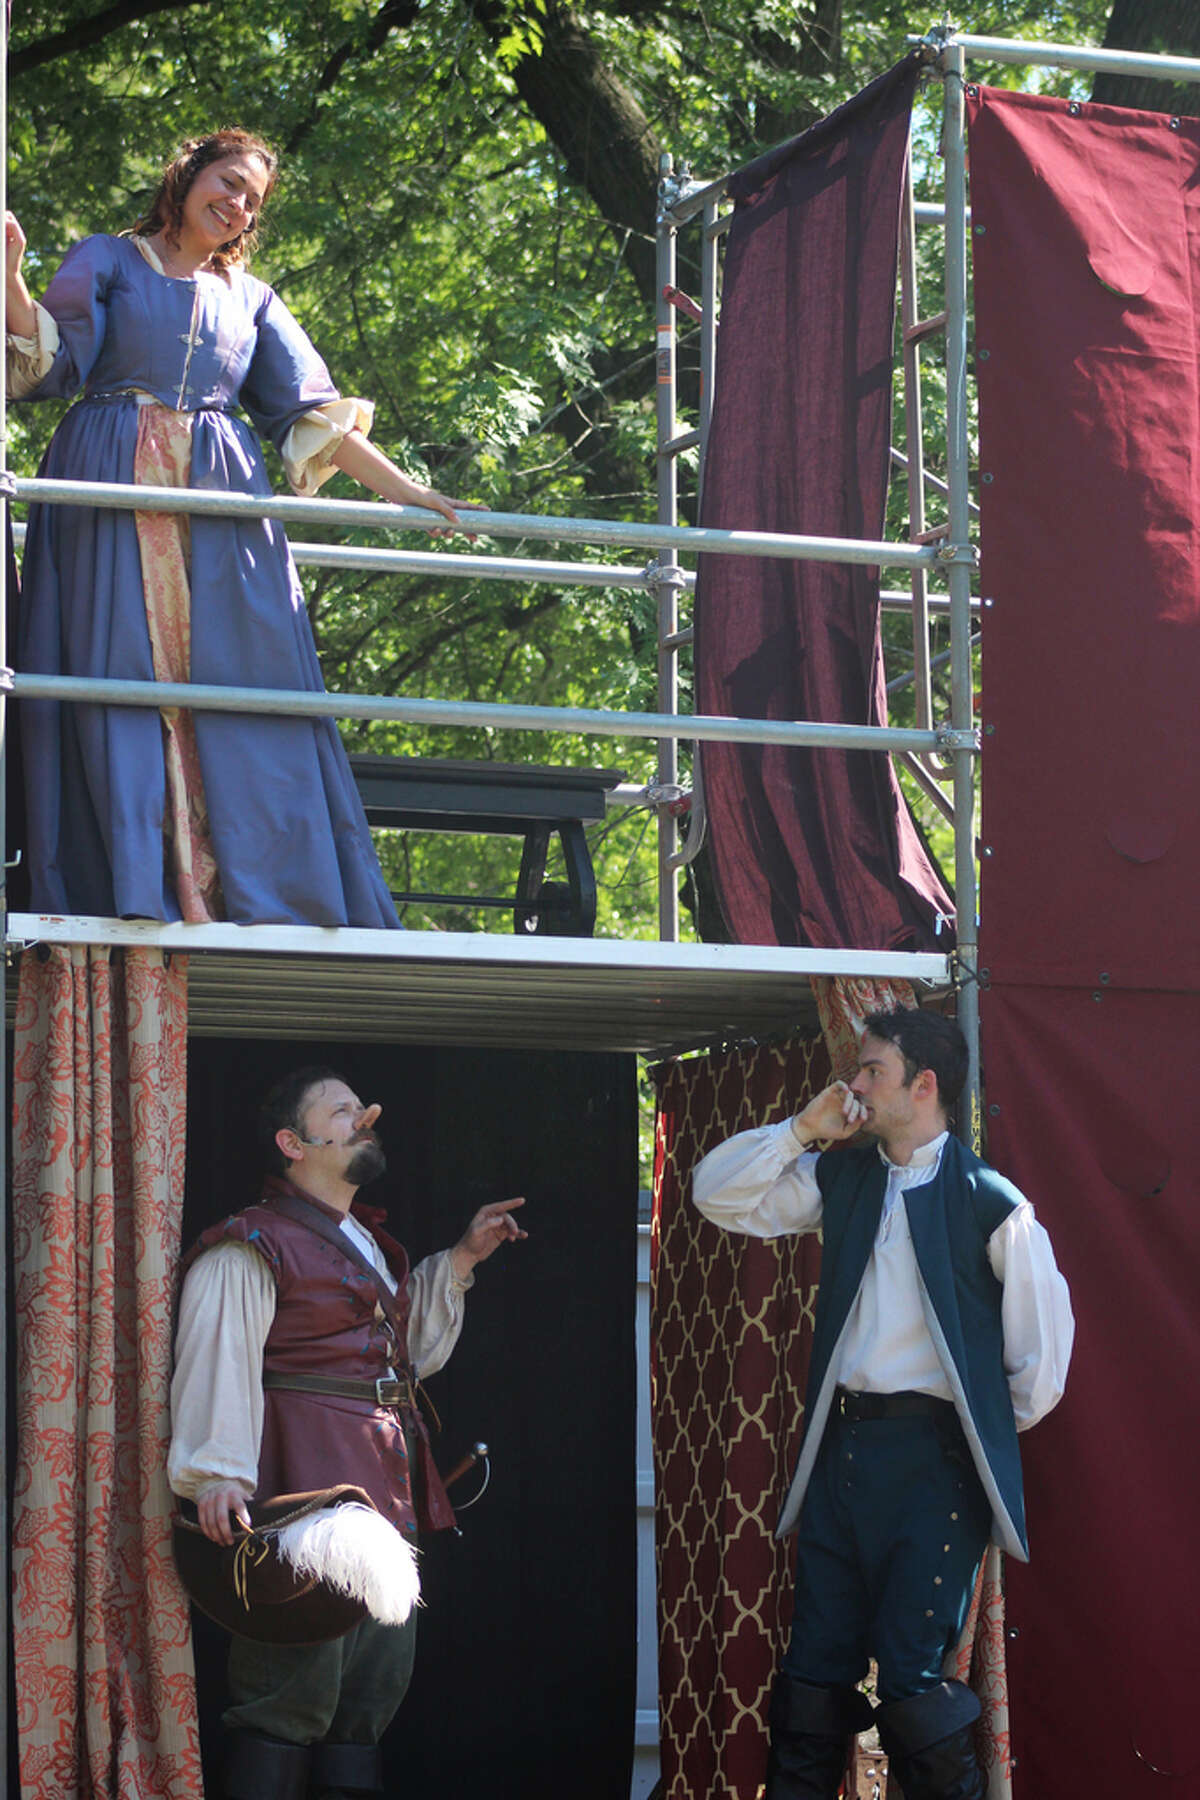 Audience can reflect on Saratoga Shakespeare's "The Tempest" in park